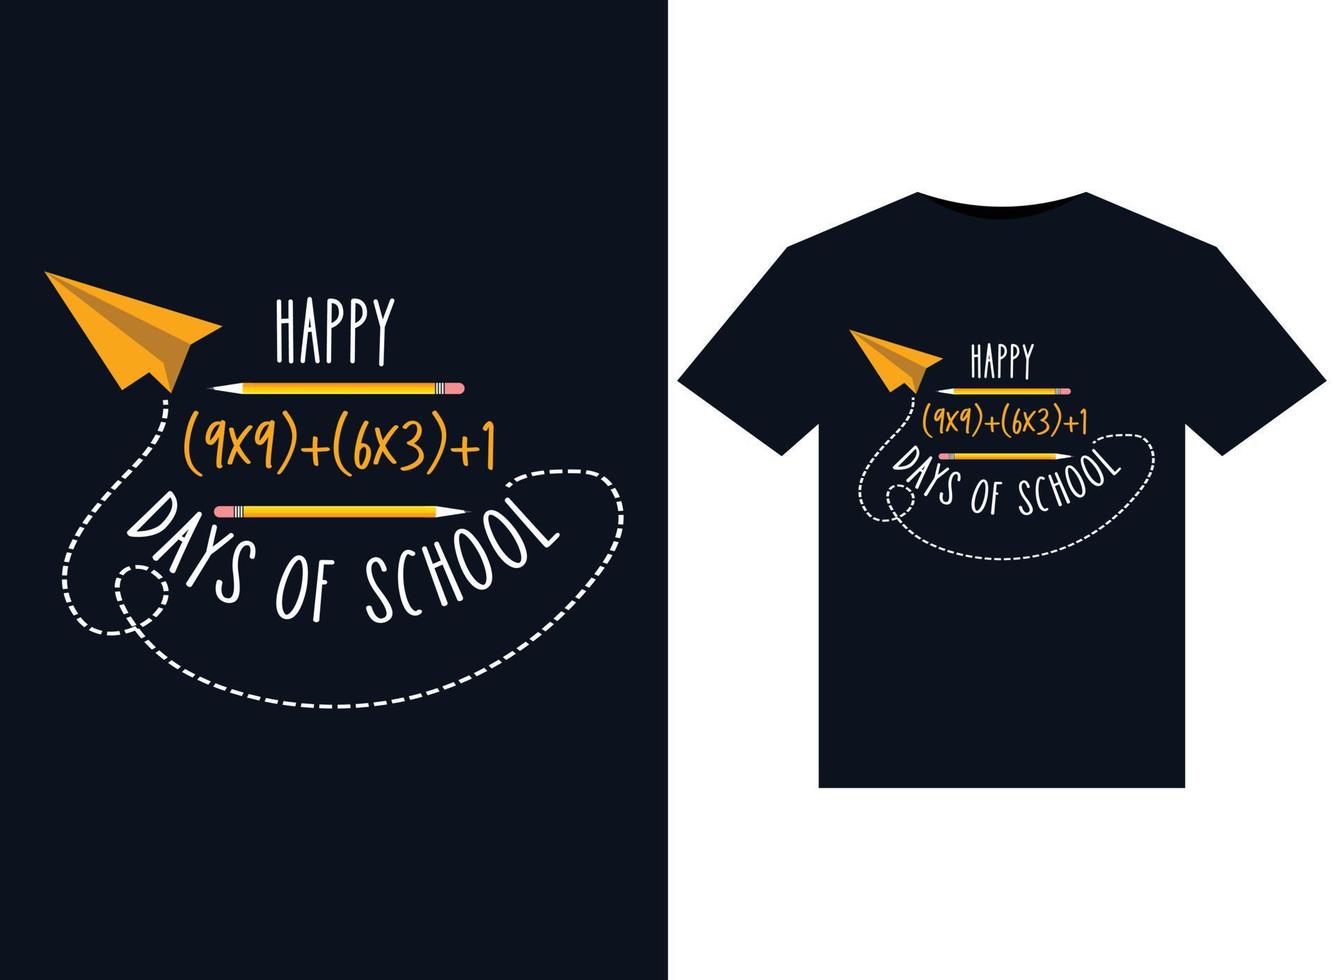 Happy  Days Of School illustrations for print-ready T-Shirts design vector